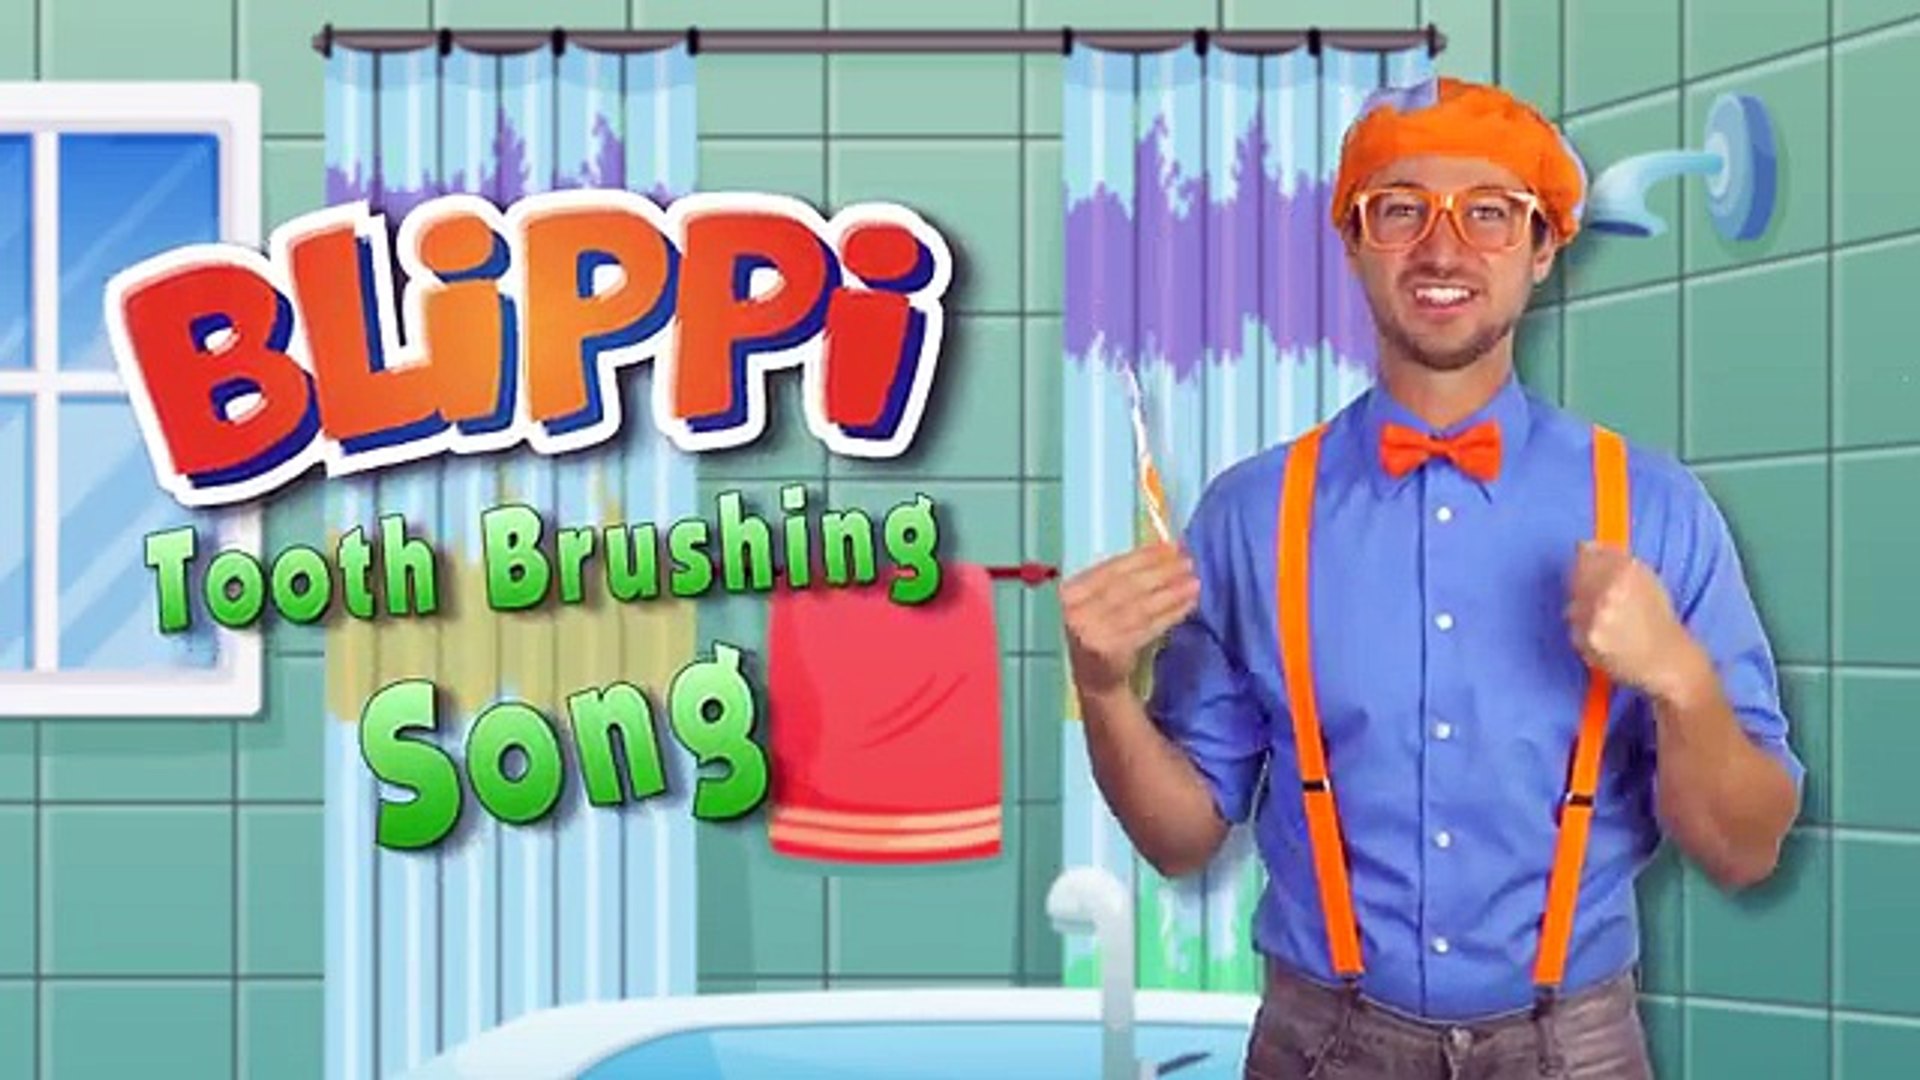 Tooth Brushing Song by Blippi | 2-Minutes Brush Your Teeth for Kids - video  Dailymotion